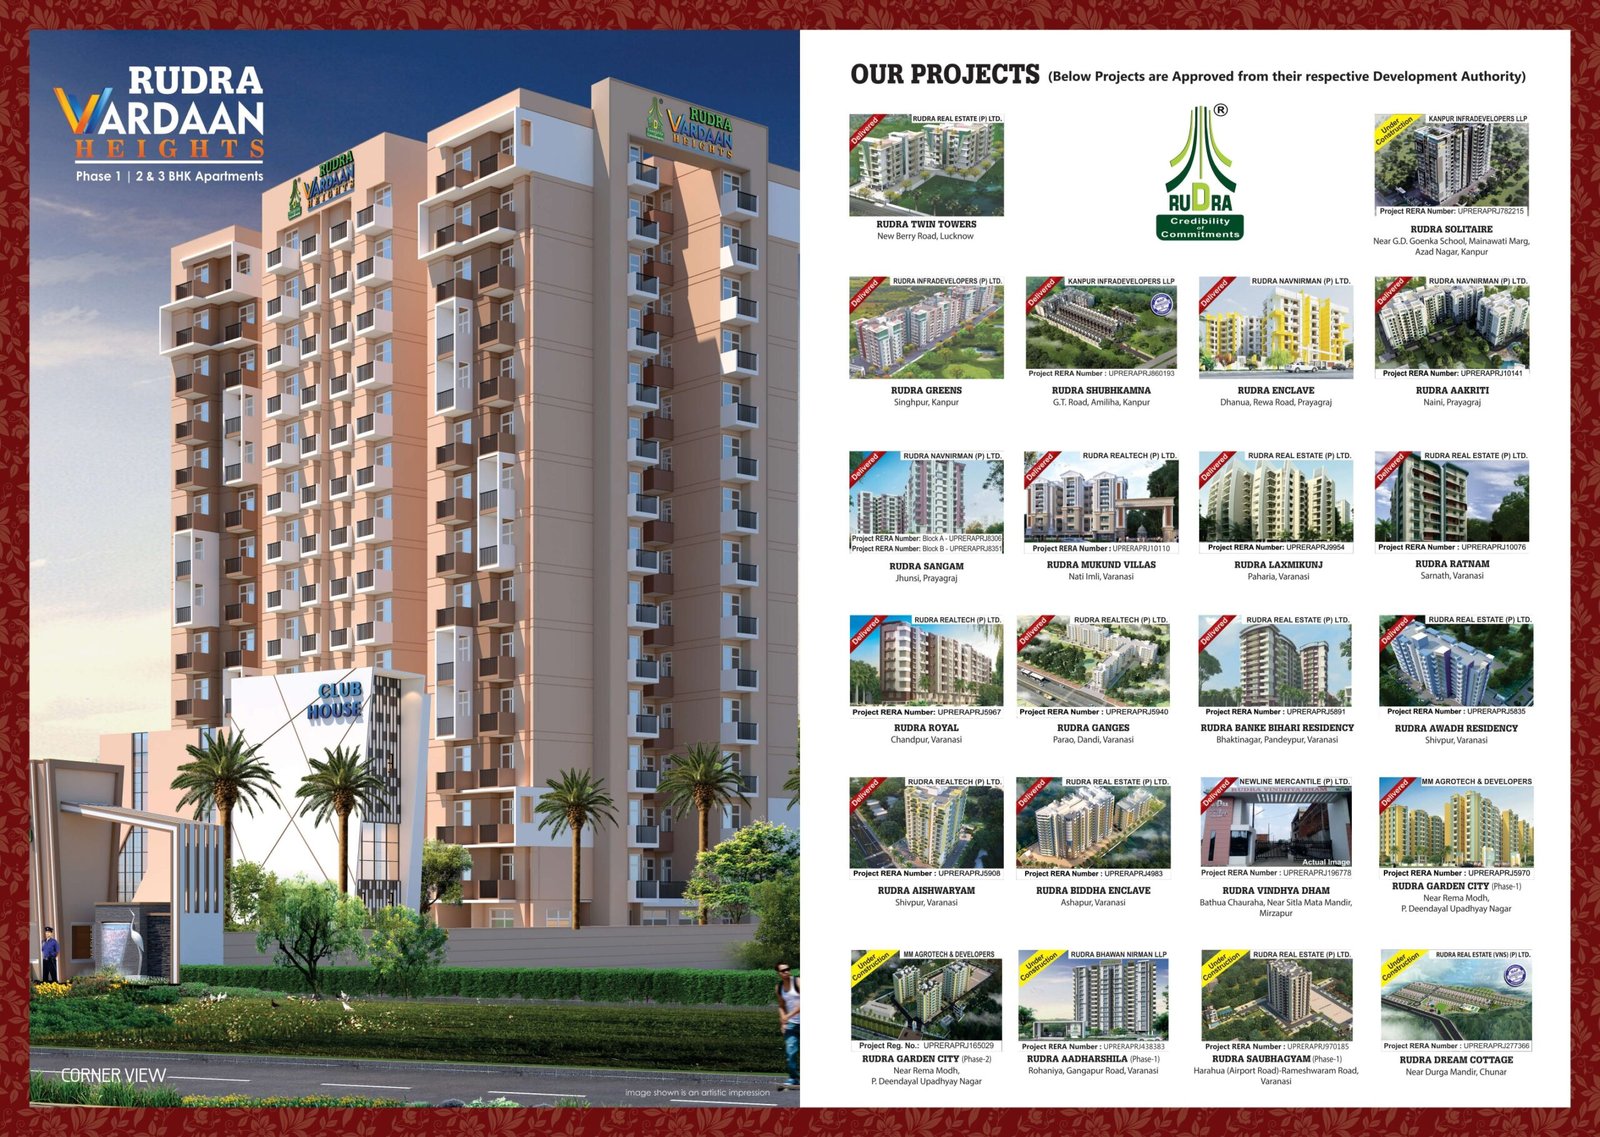 2/3 BHK Apartments lda approved.